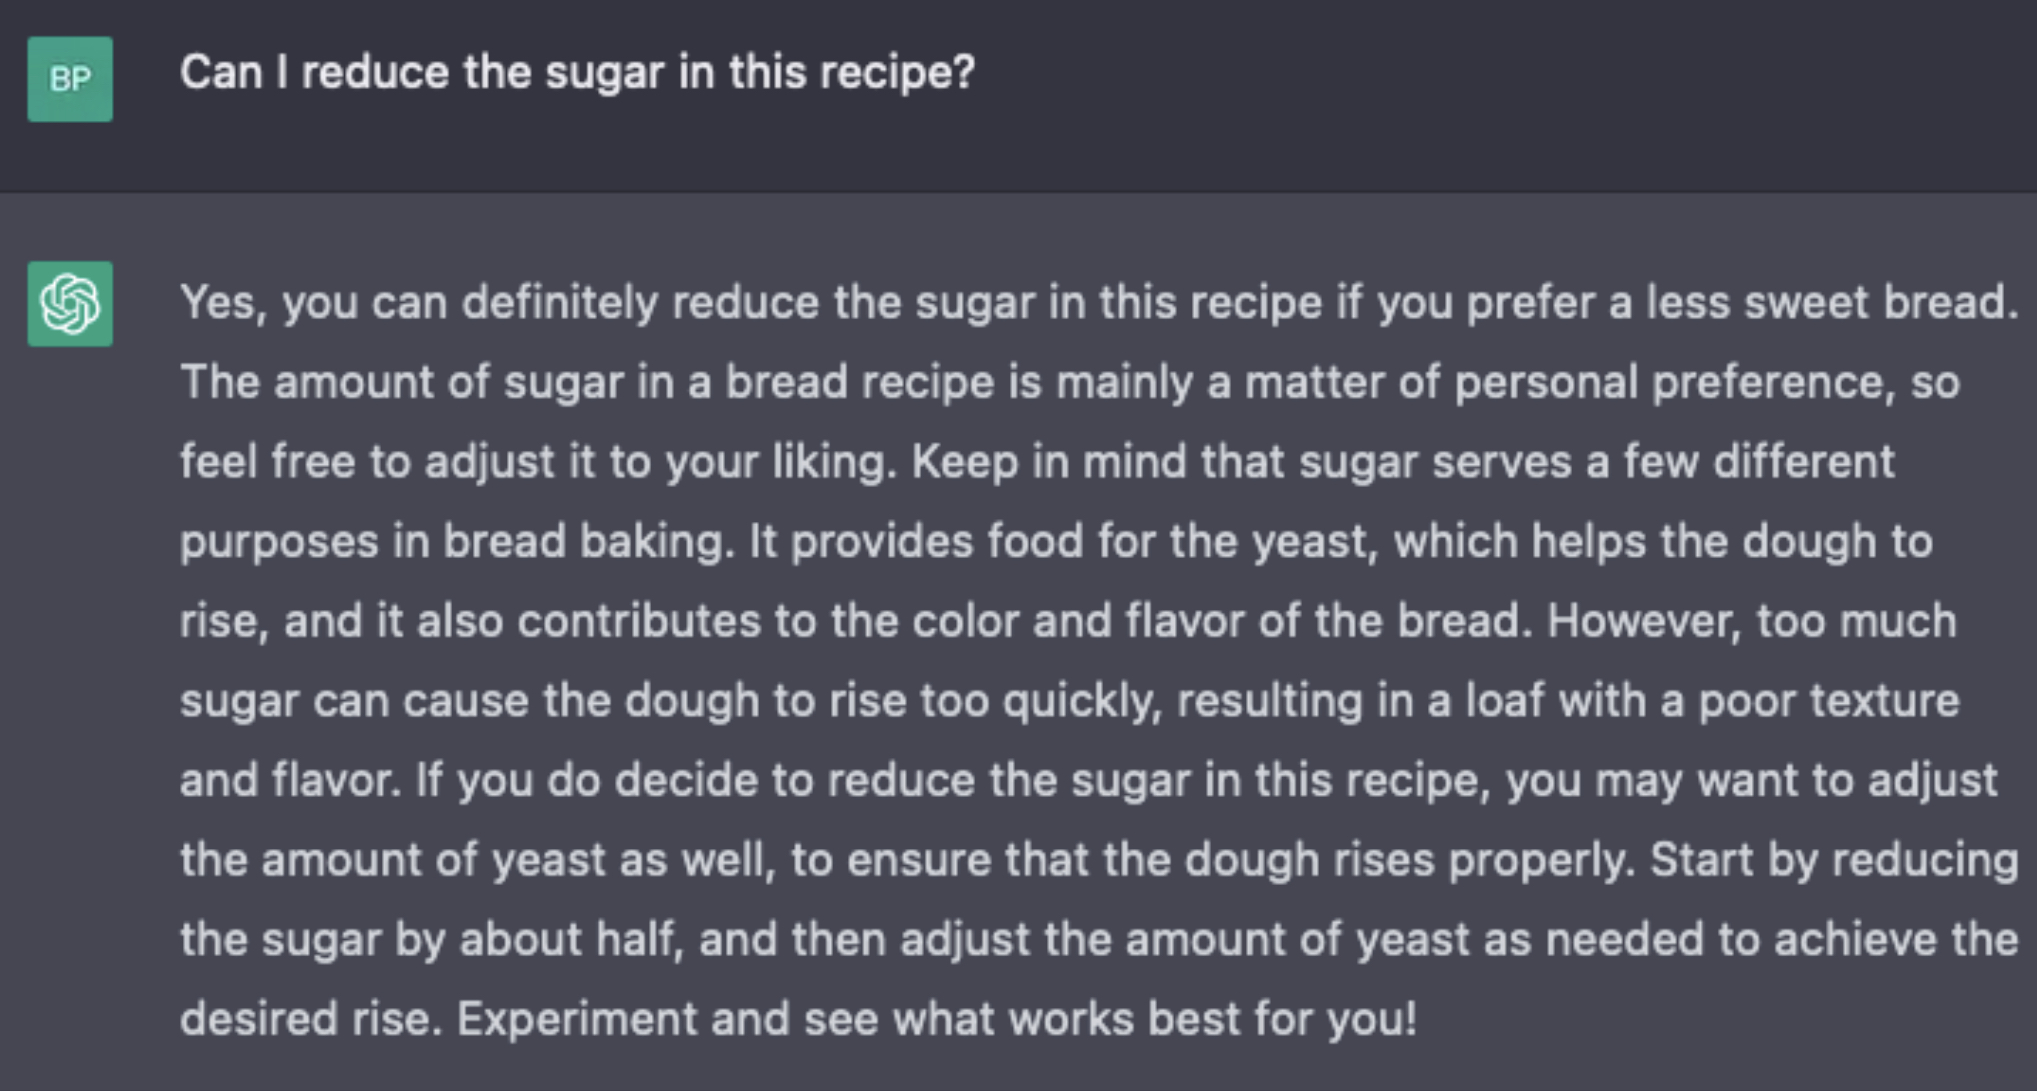 Response on whether I can reduce the sugar in this recipe